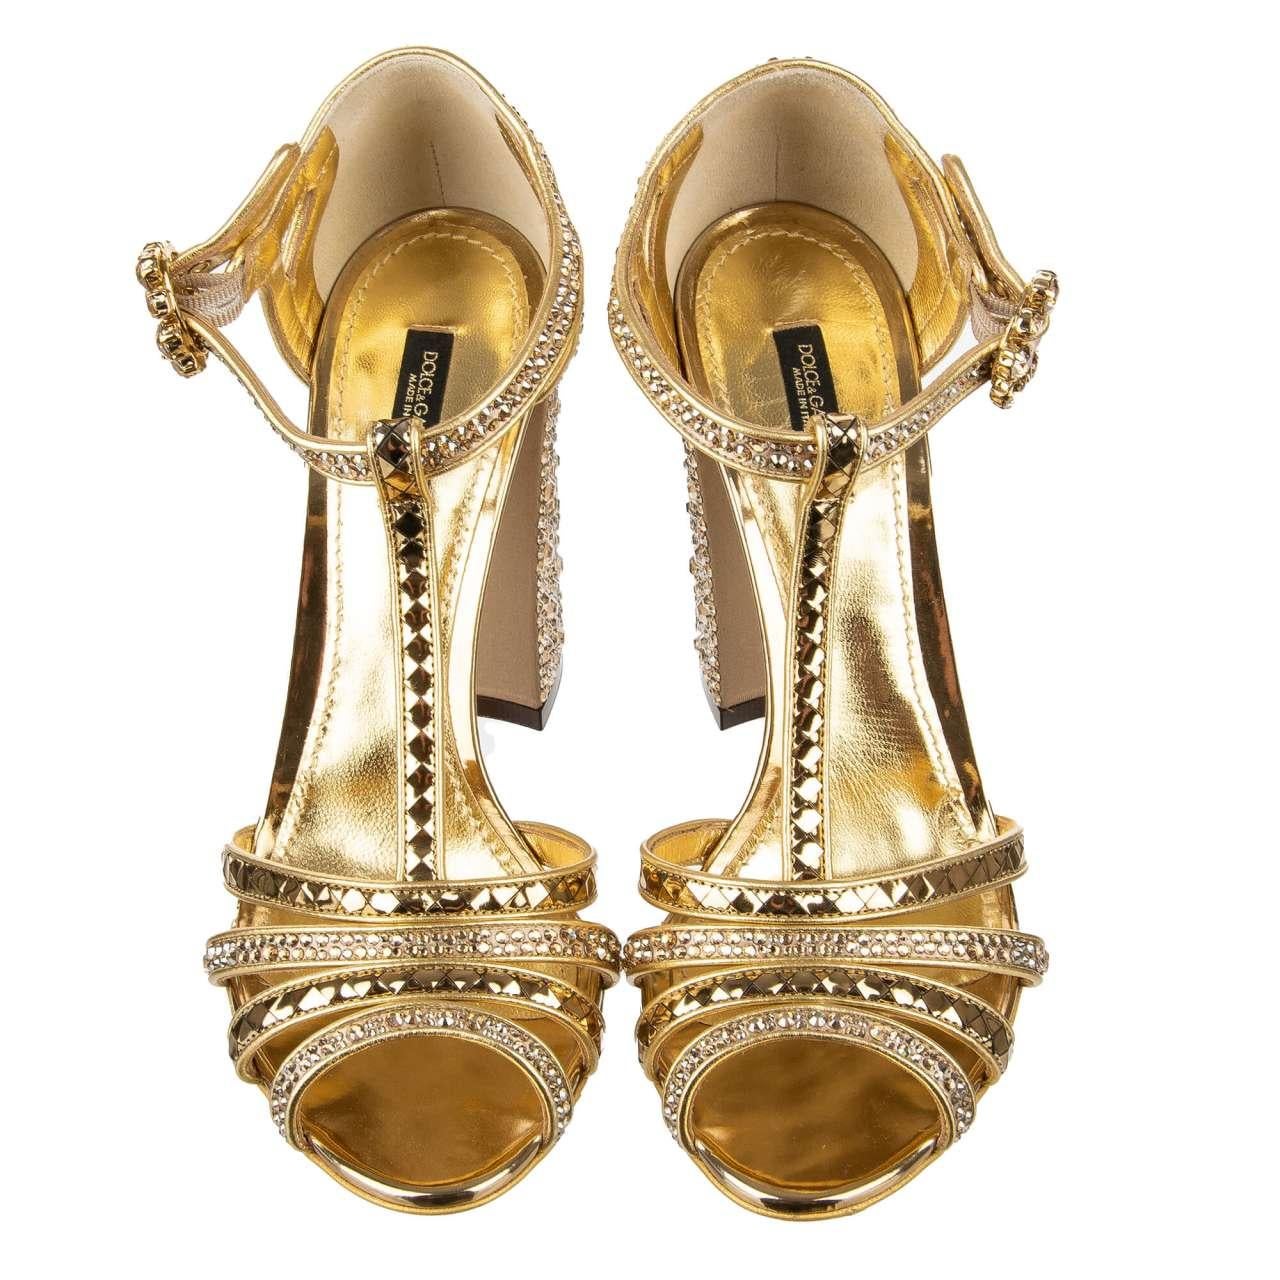 - Leather and Silk High Heel Sandals KEIRA with Disco ball pattern, crystal embellished block heel and buckle in gold by DOLCE & GABBANA - MADE IN ITALY - RUNWAY - Dolce & Gabbana Fashion Show - Former RRP: EUR 1.350 - New with Box - Model: